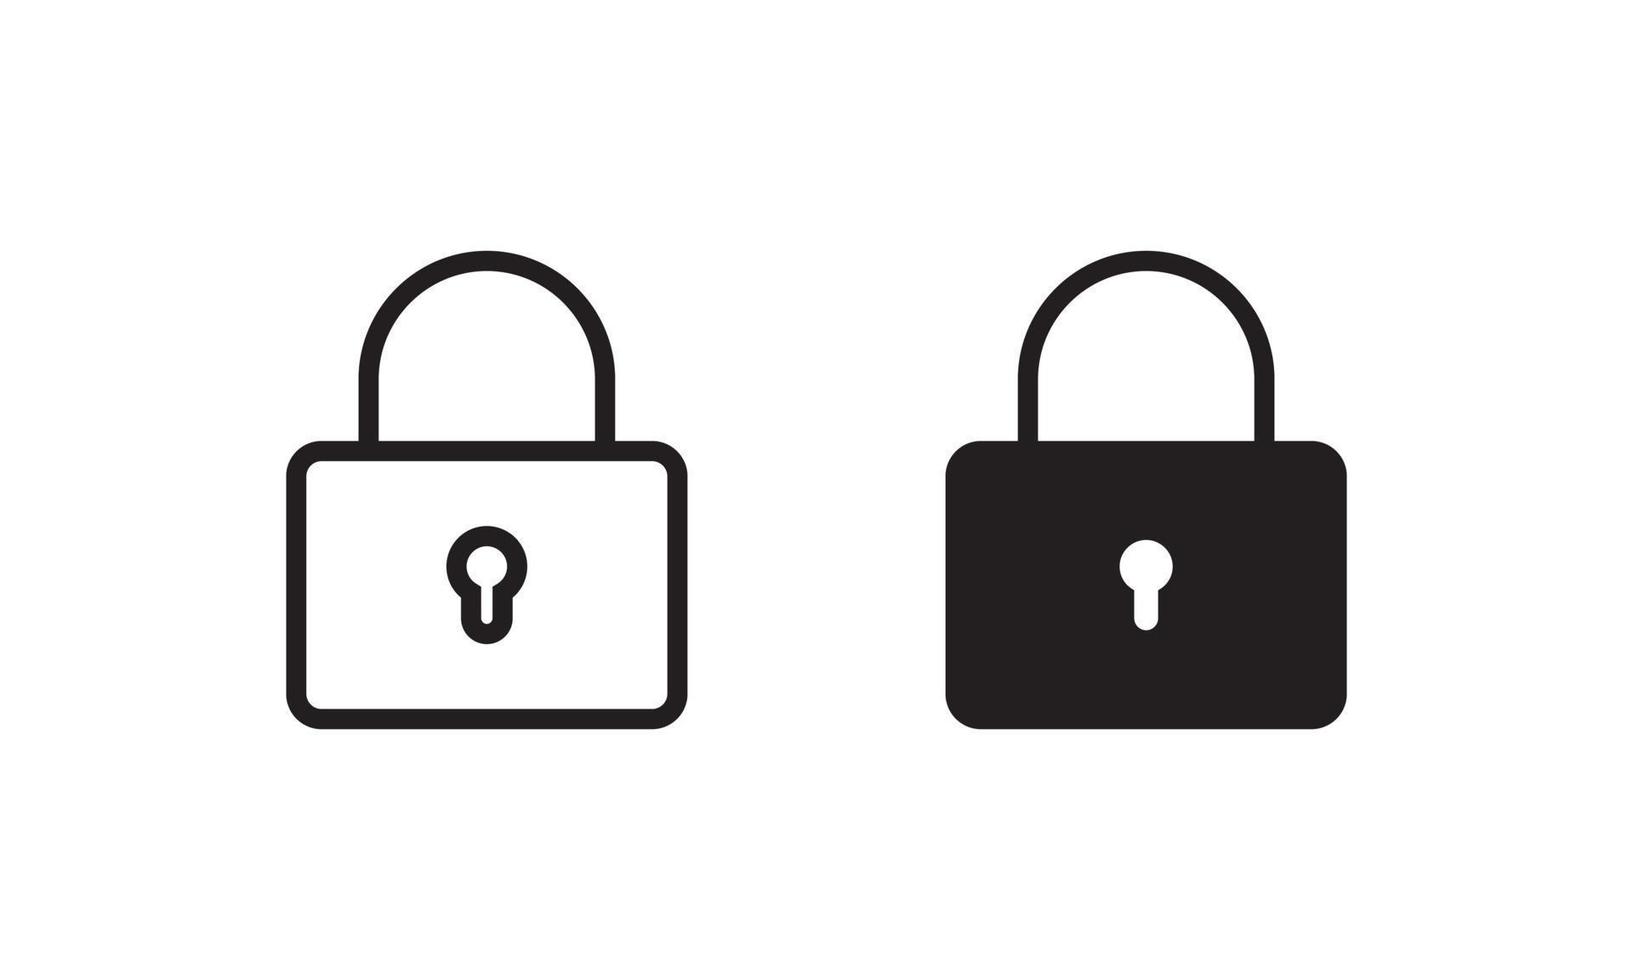 Padlock icon vector for web or mobile app